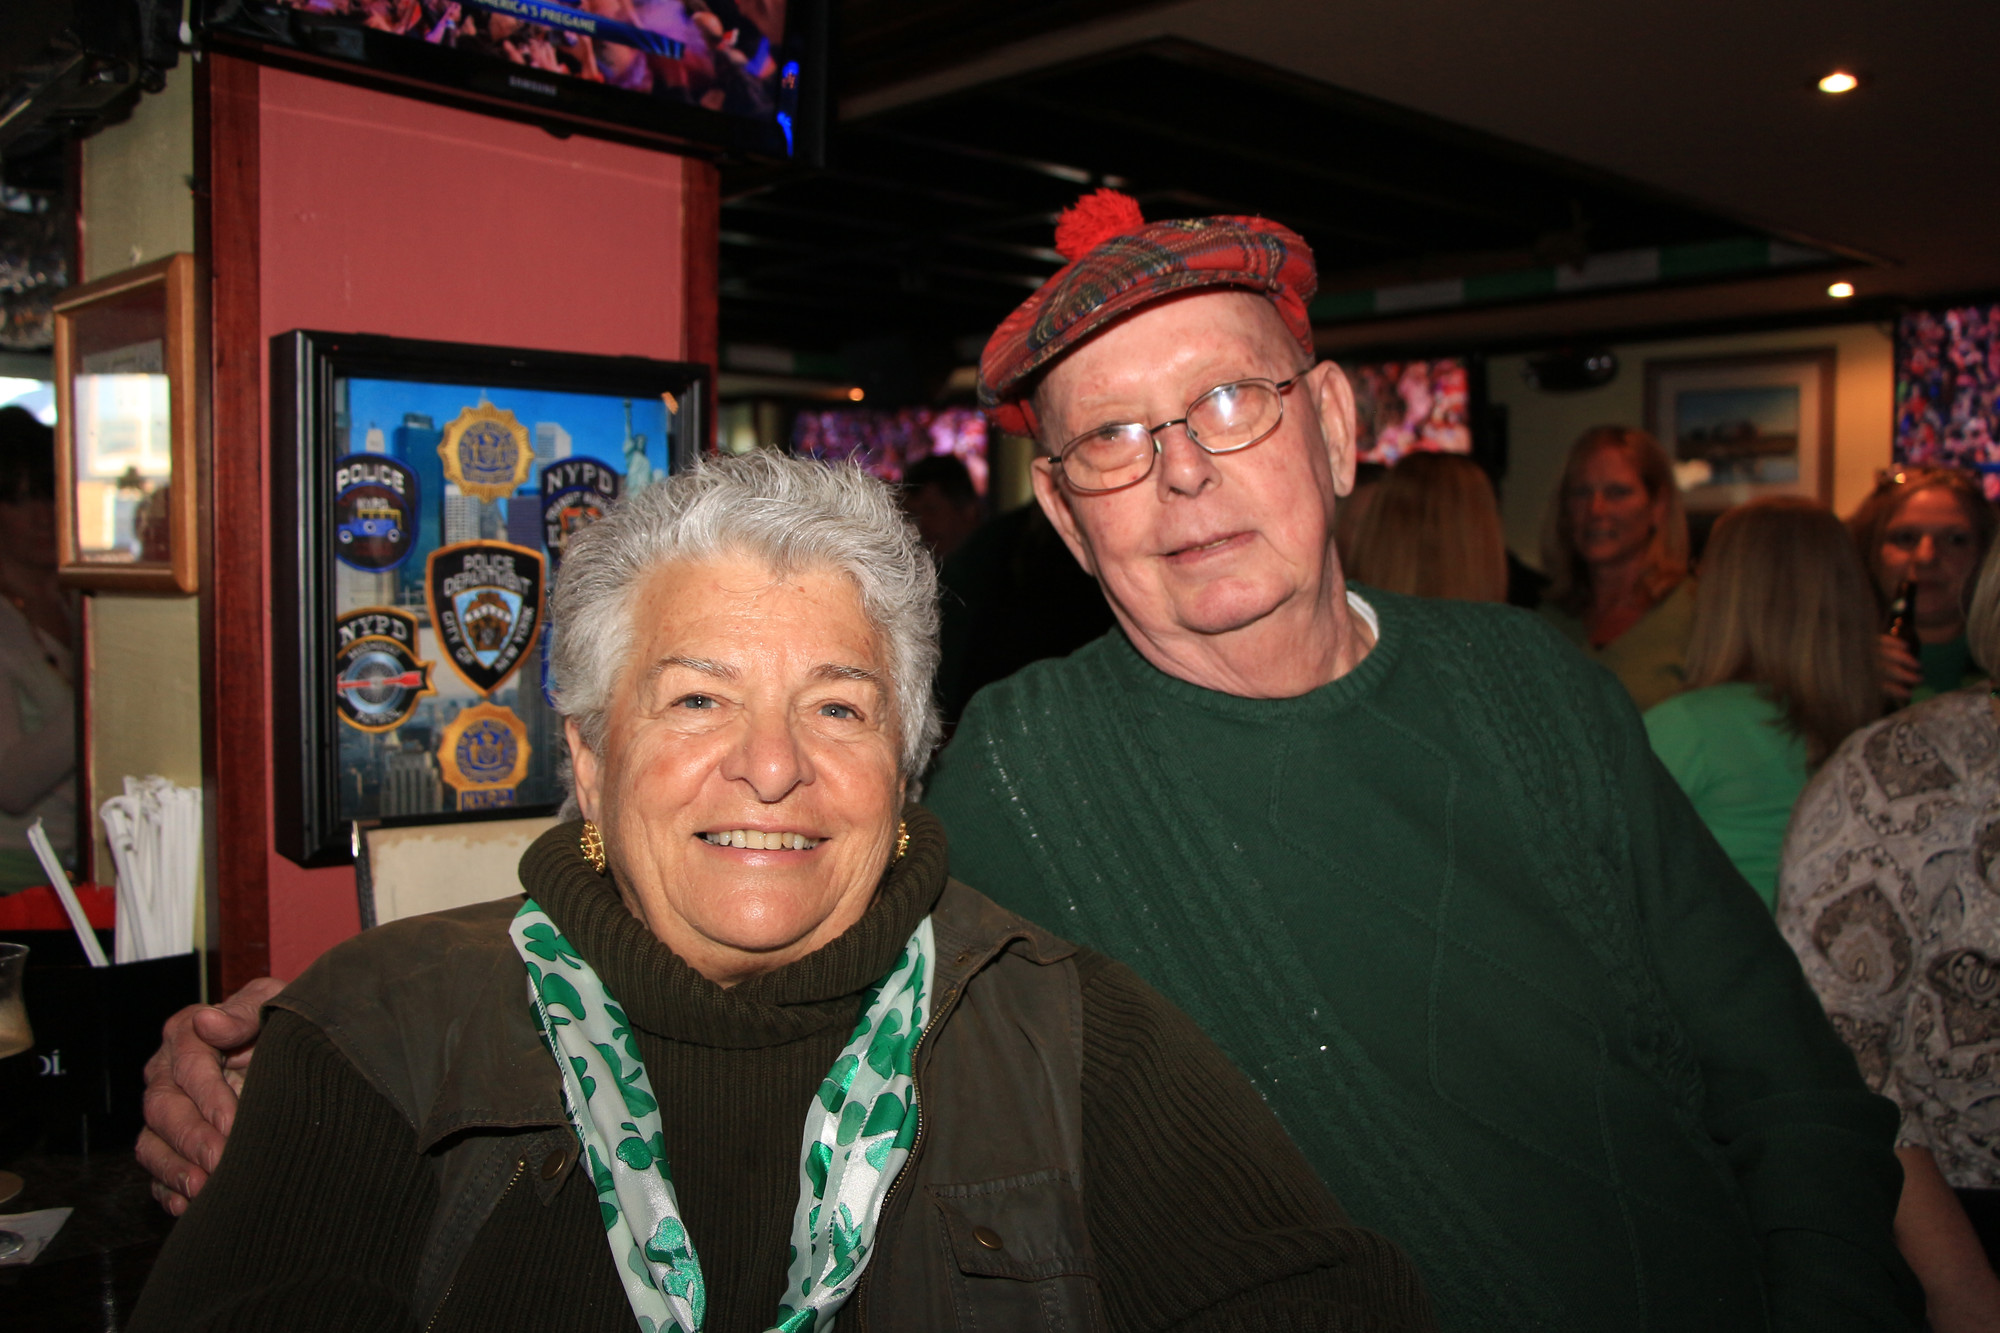 Ginny Foley and Robert McCormick shared laughs with many friends, at Sonny’s Canal House on St. Patrick’s Day.